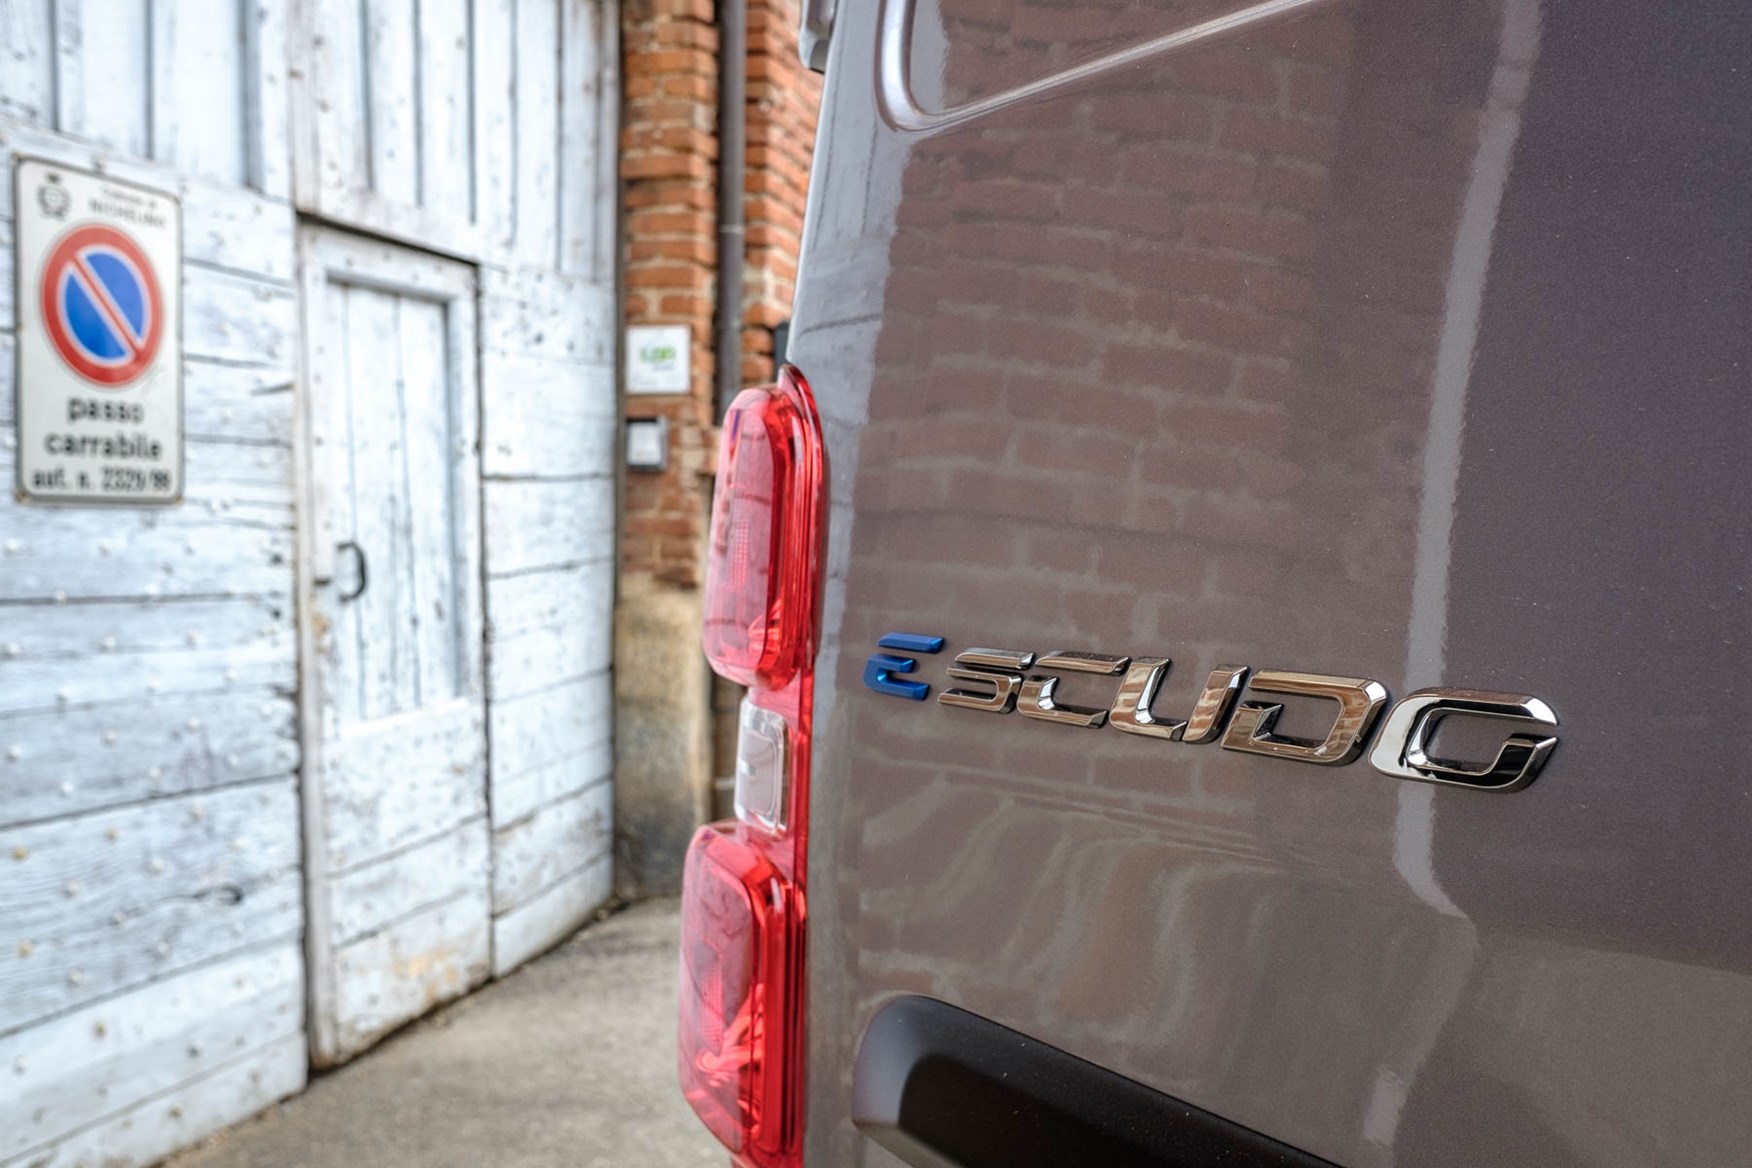 The new Fiat Scudo electric minivan offers 100 kW from 37,000 euros